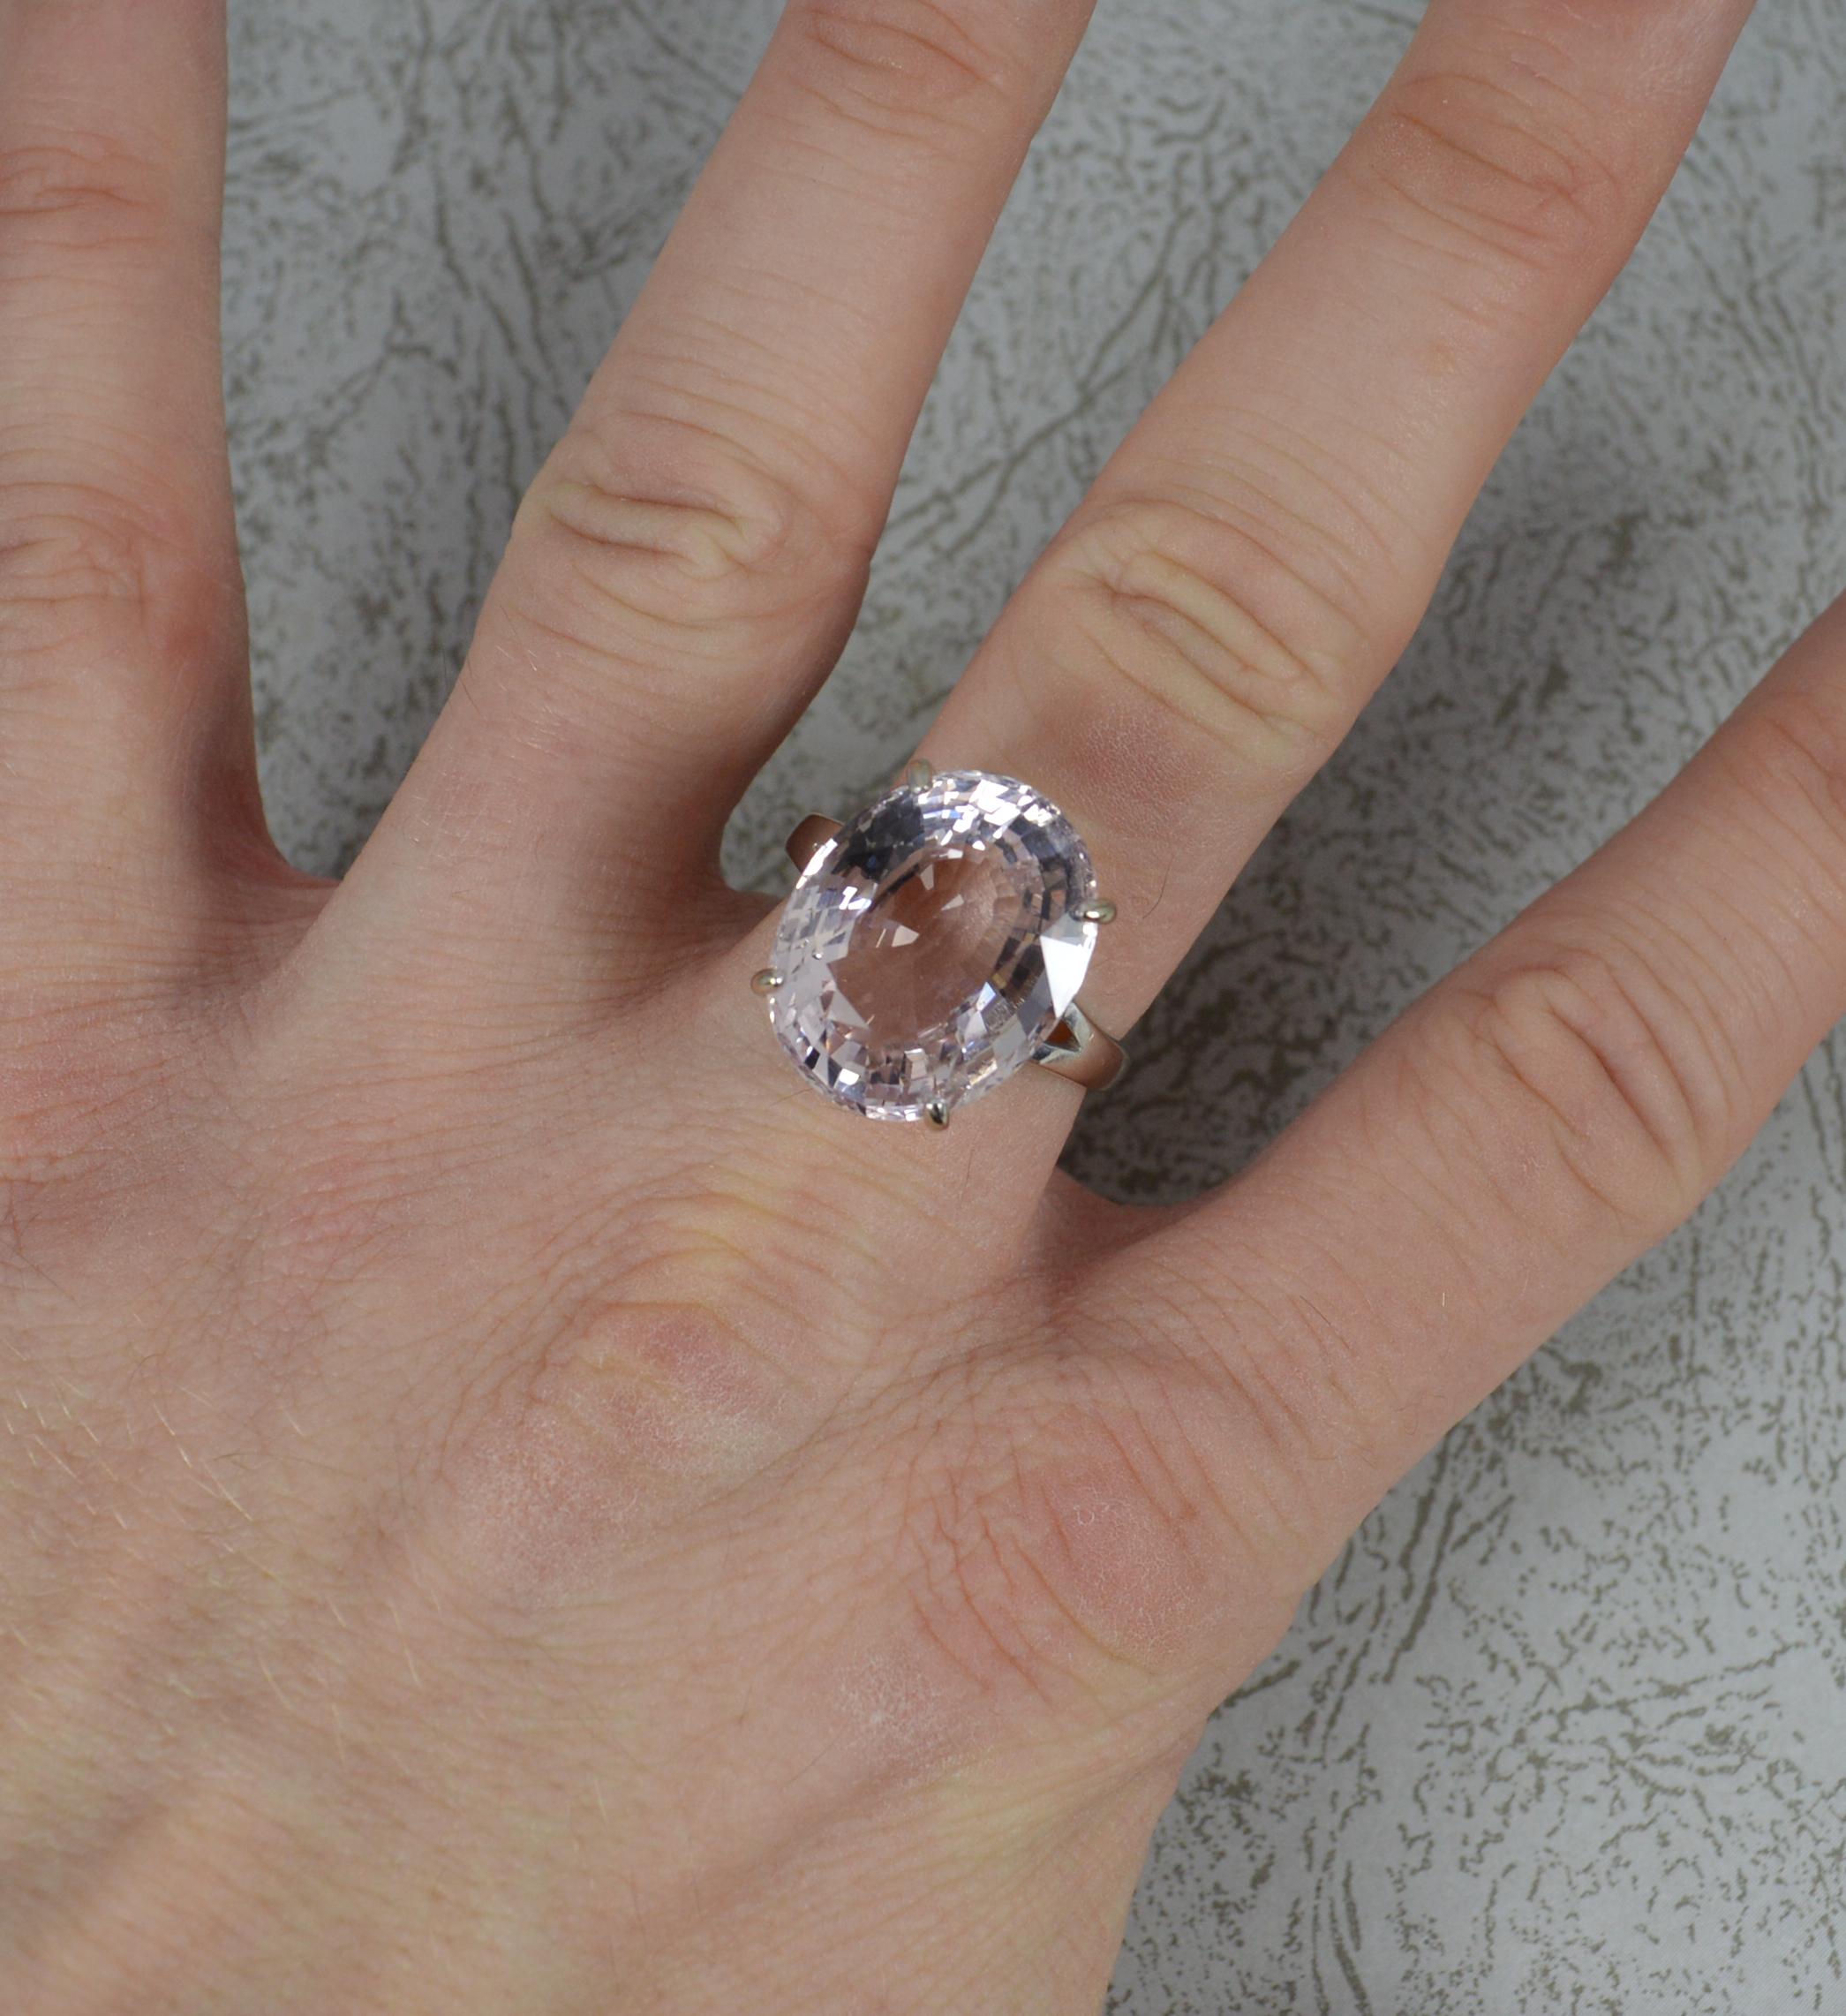 A superb statement ring.
Solid 18 carat white gold example.
Designed with an oval cut natural pink kunzite stone in four claw setting. 14mm x 18mm approx 14 carat. Protruding 10mm off the finger.

CONDITION ; Very good. Clean shank. Well set stone,